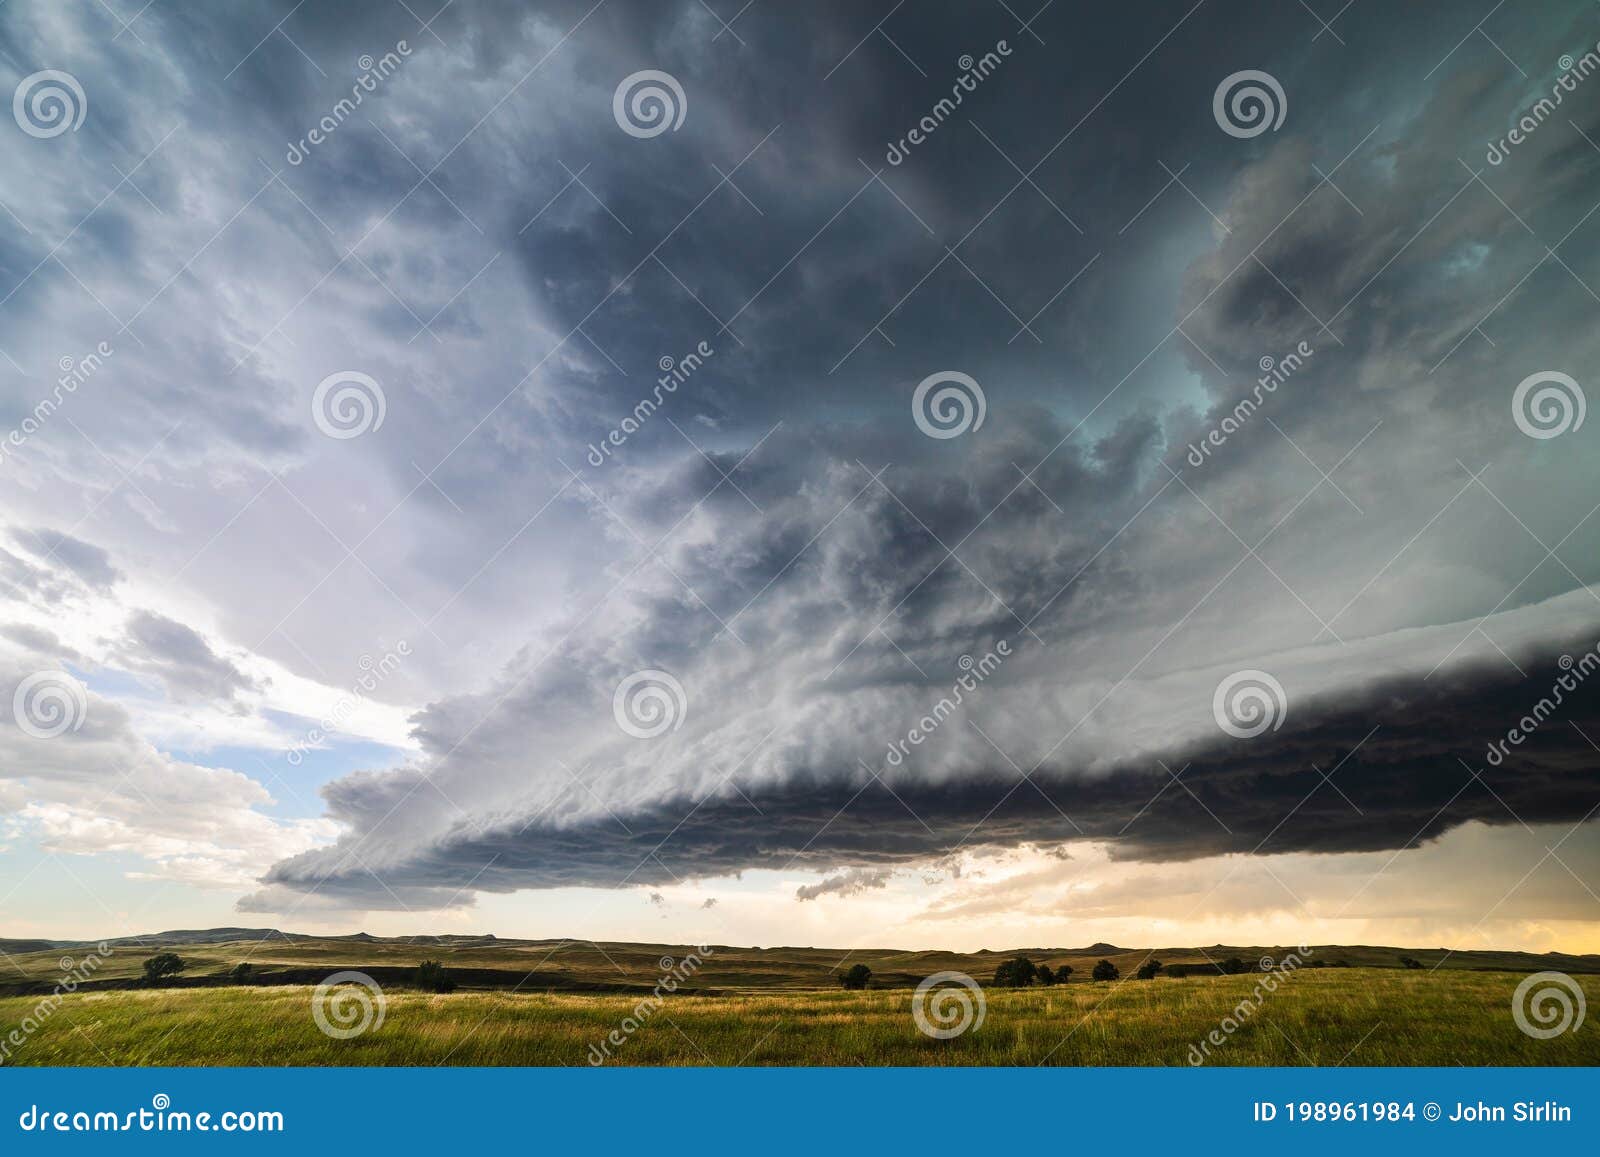 derecho storm clouds and severe weather